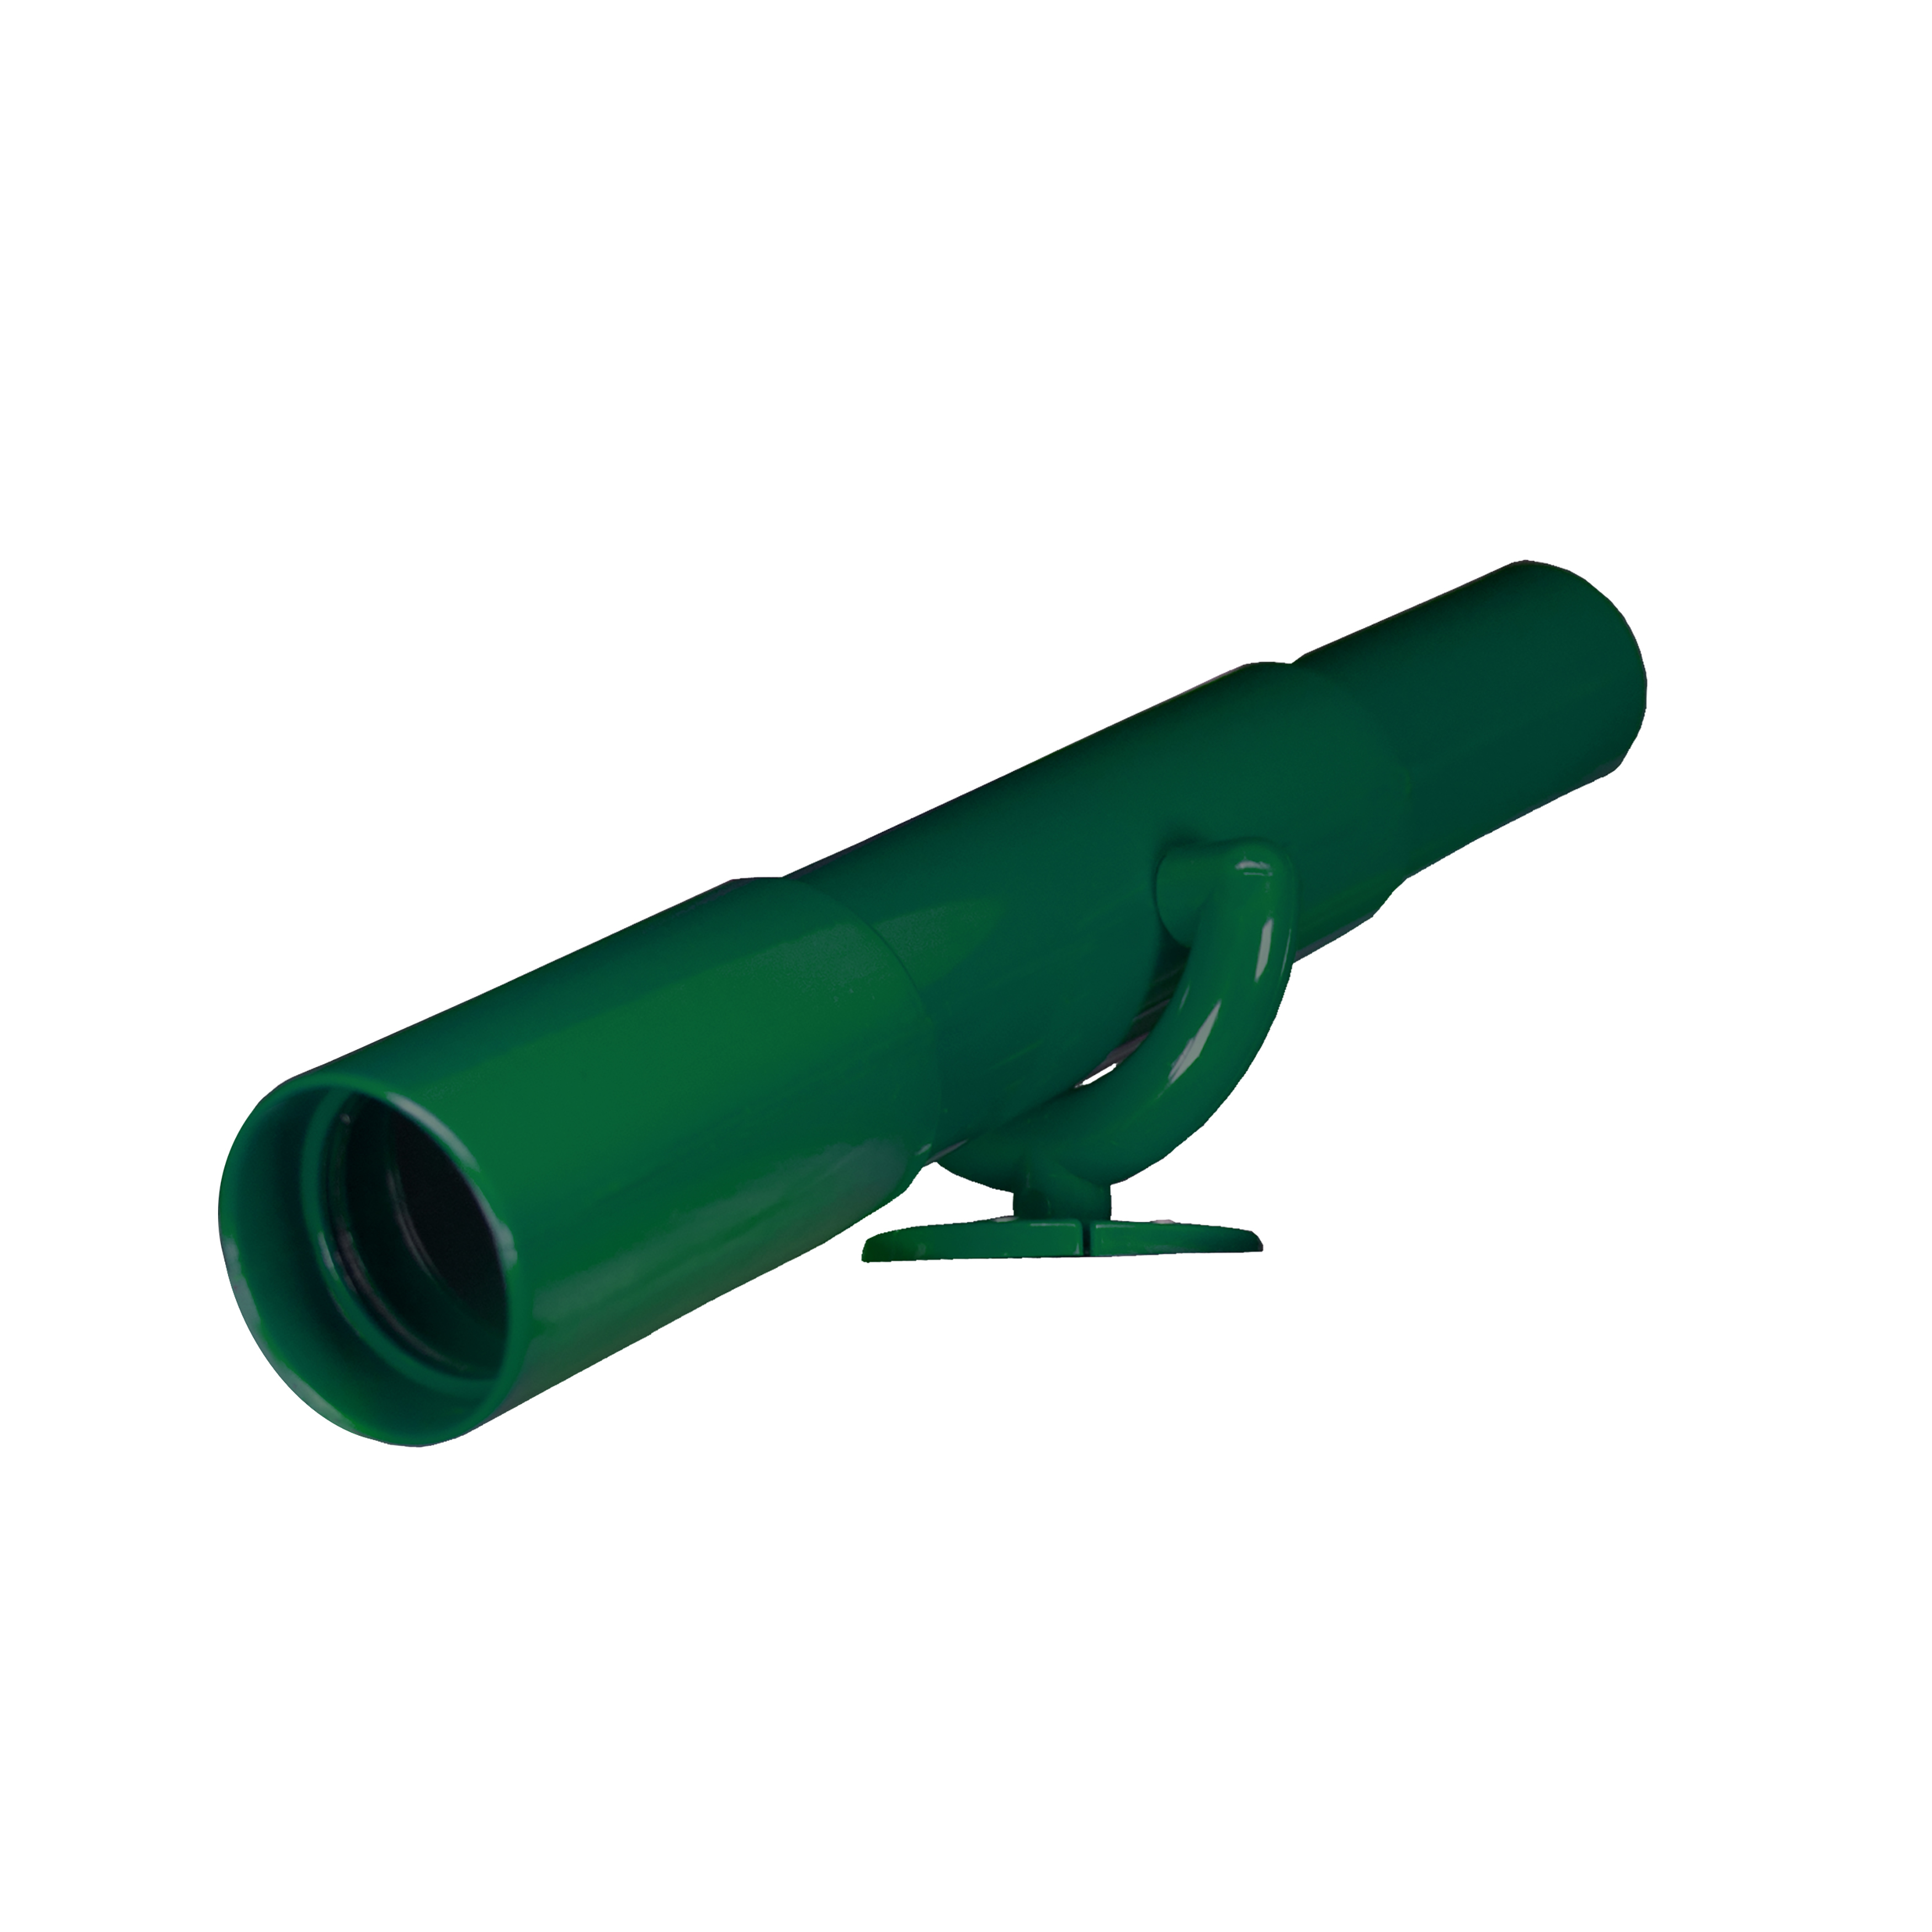 Gorilla Playsets Non-Magnifying Play Telescope with Mounting Hardware – Green - image 1 of 2